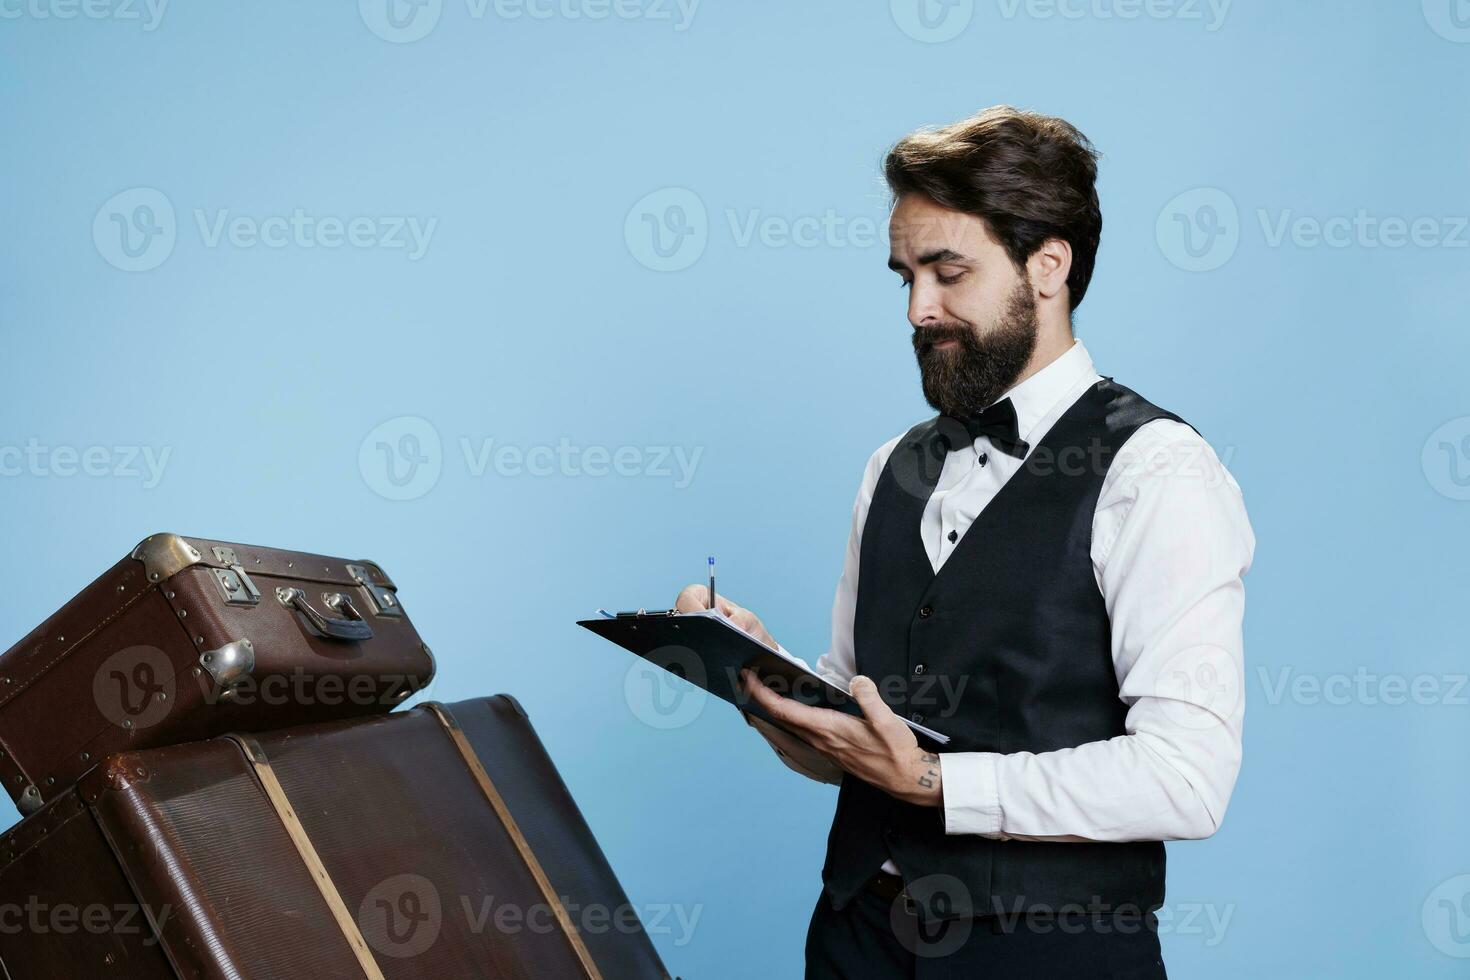 Doorman with tie verifying list on papers, checking names of hotel guests as they arrive. Young man with bellhop occupation takes notes on archive register files to keep evidence on camera. photo